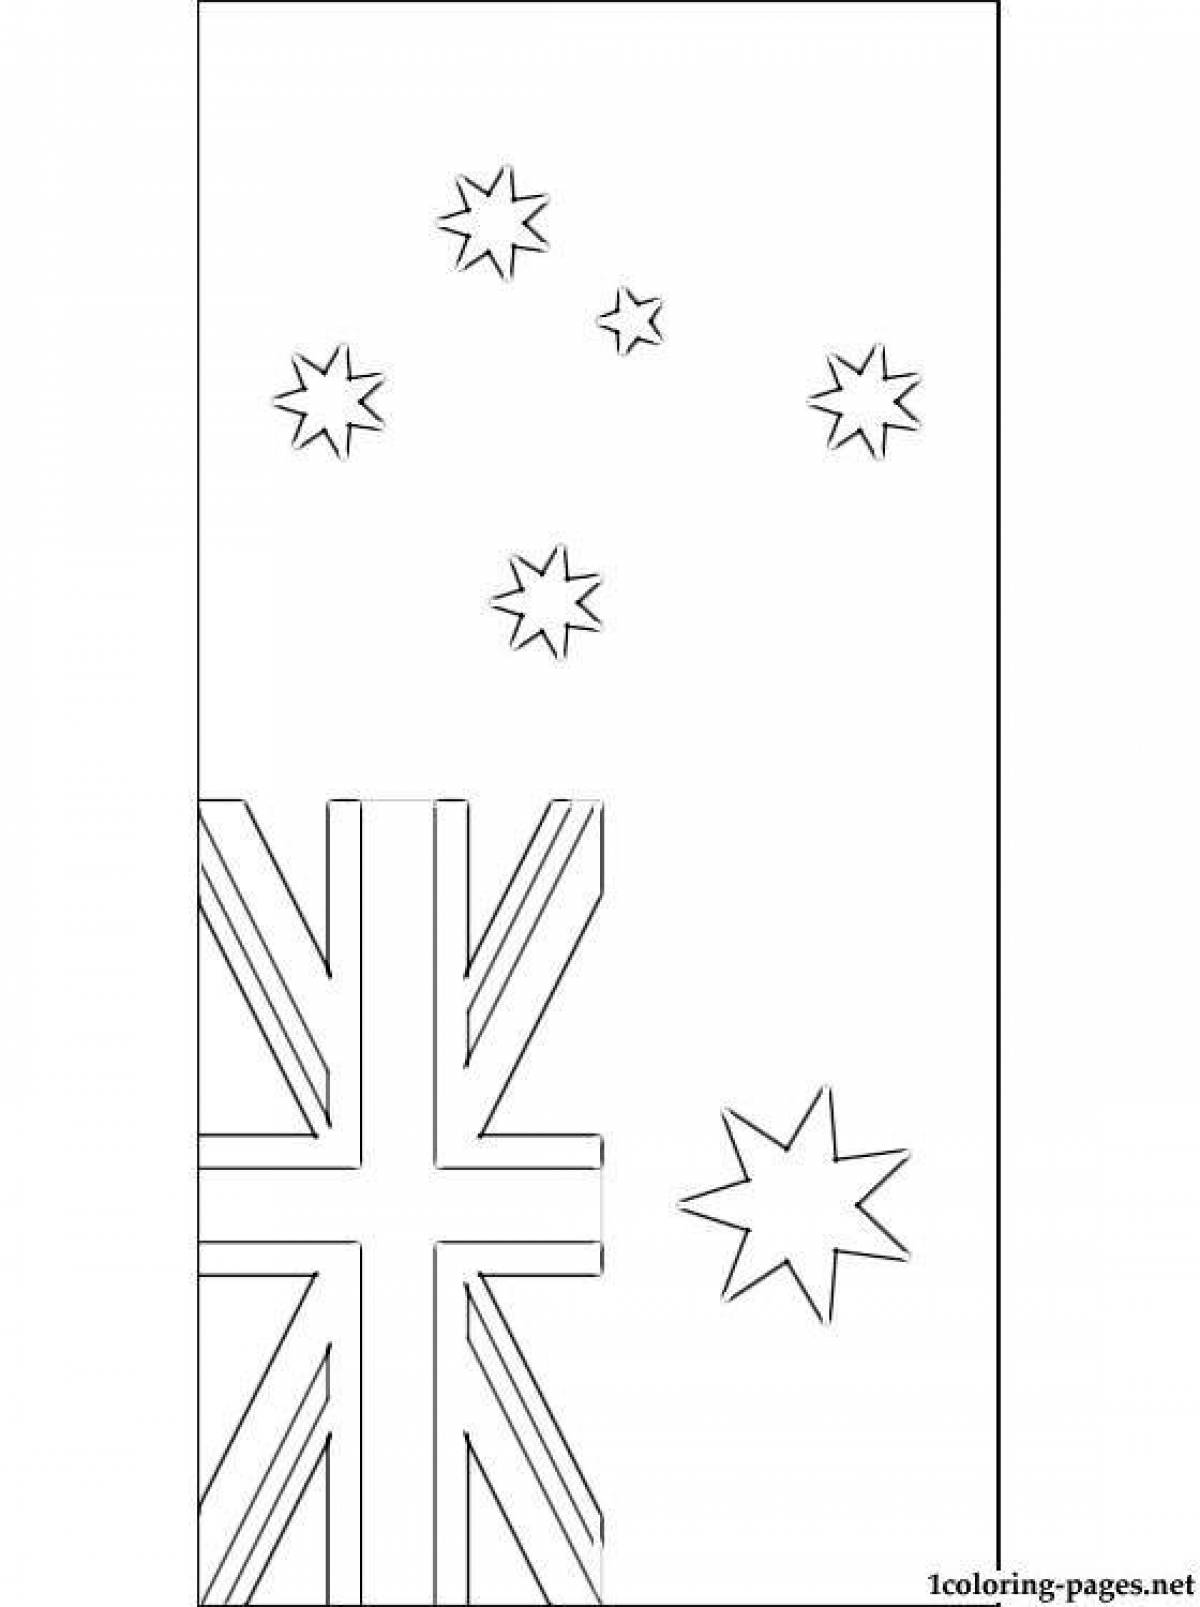 Exciting australia flag coloring page